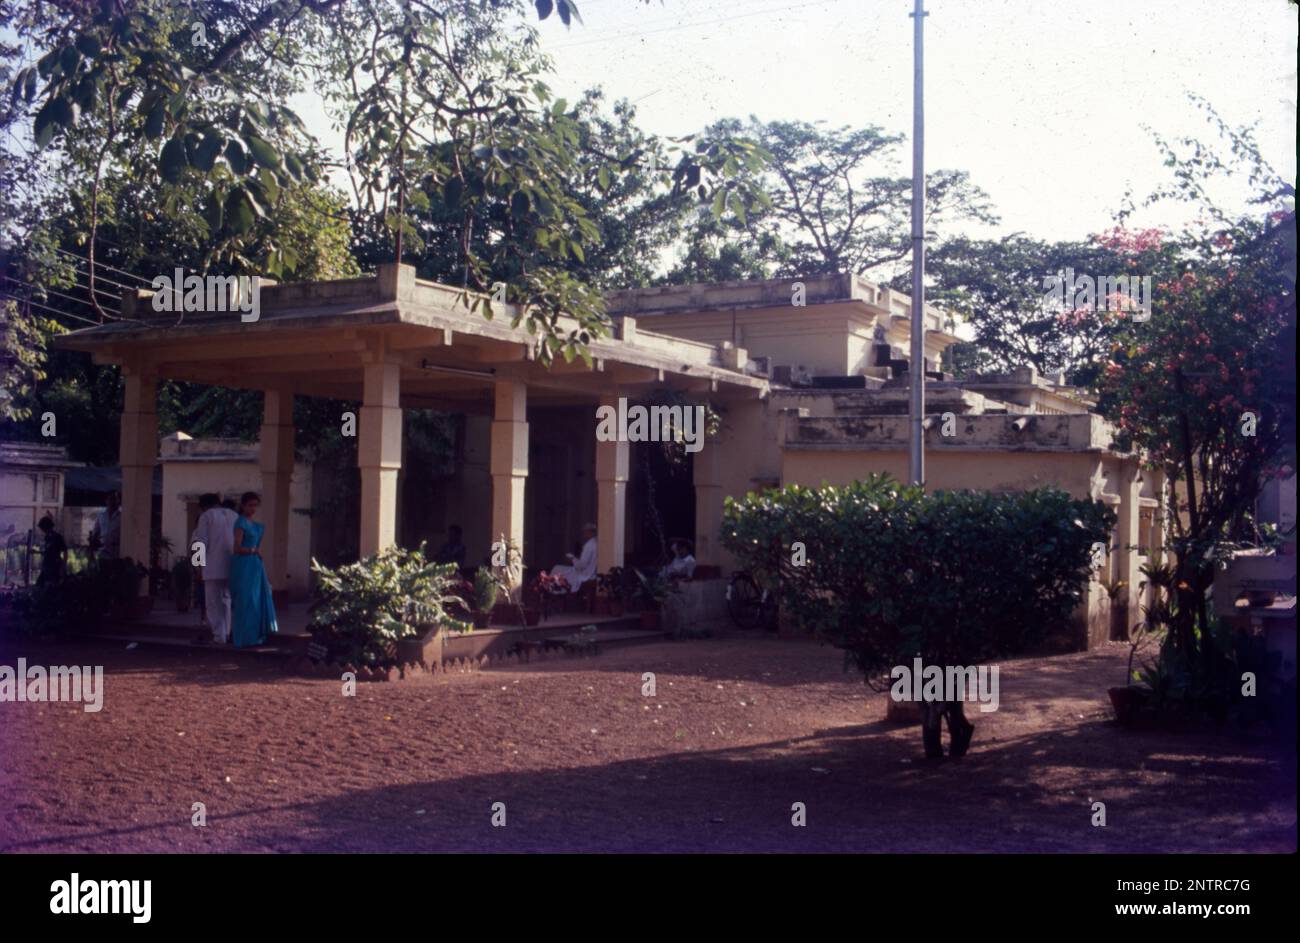 Shantiniketan is a neighbourhood of Bolpur town in the Bolpur subdivision of Birbhum district in West Bengal, India, approximately 152 km north of Kolkata.The complex includes five of Tagore's houses – Punascha, Shamali, Konarka, Udichi and Udayana. Udayana is where Tagore lived. Stock Photo